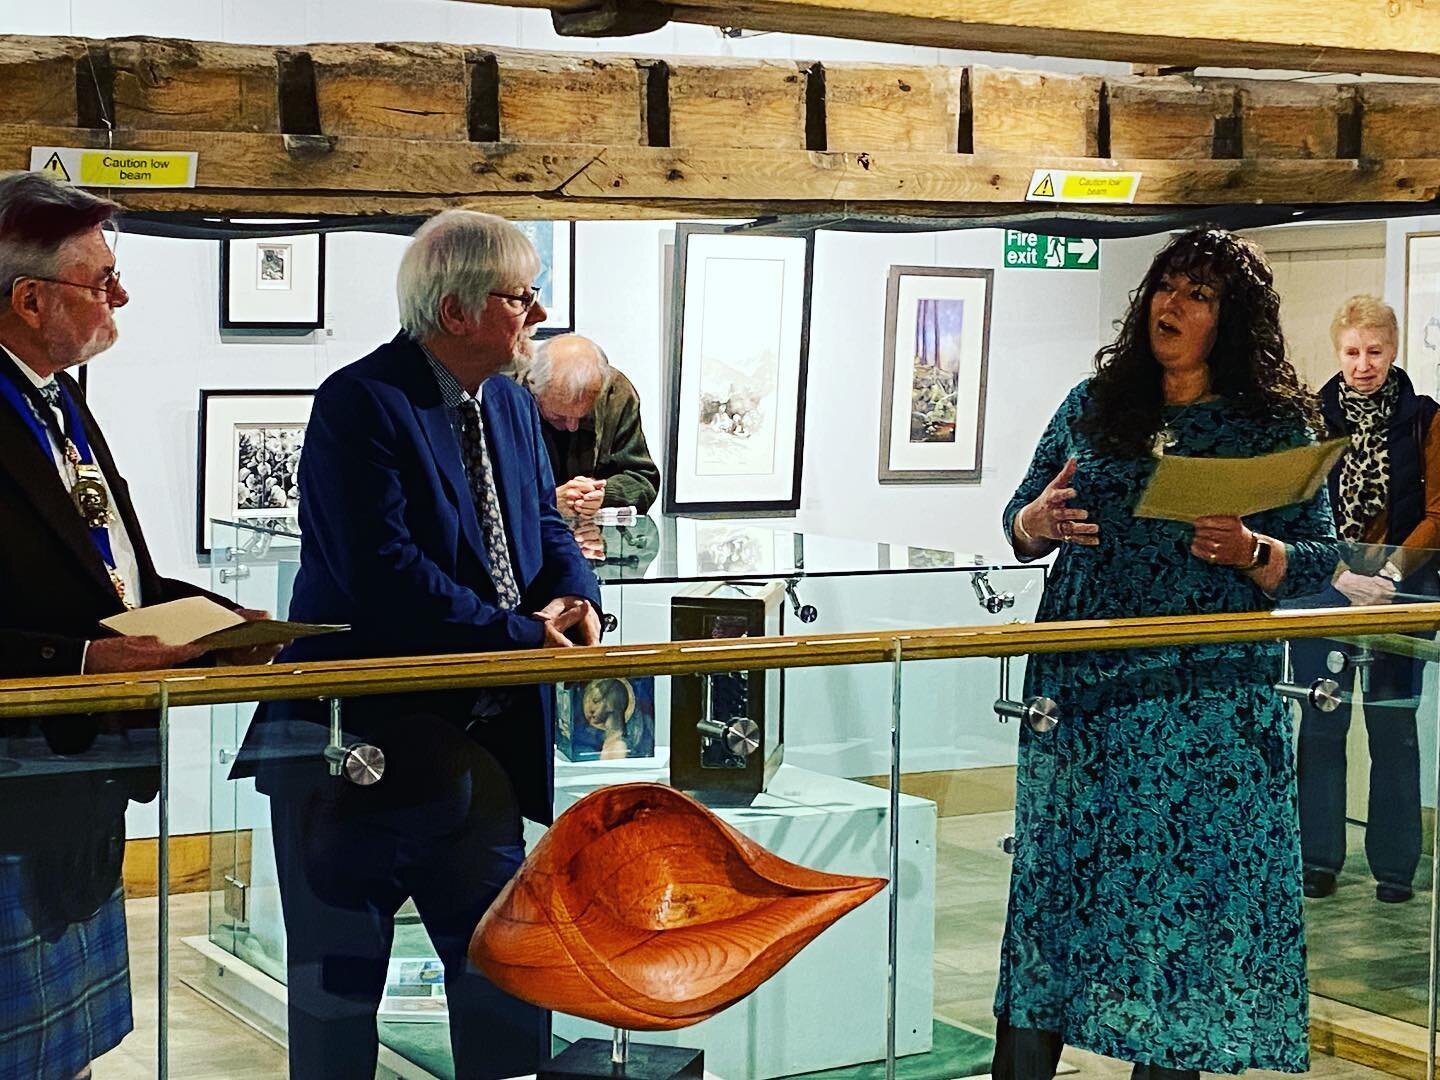 I felt very honoured to be presented with the Elsie Holland award today at the opening of the Wolverhampton Society of Artists annual exhibition at Weston Park for my wood engraving &ldquo;All That I Am I Give To You&rdquo; #wolverhamptonsocietyofart